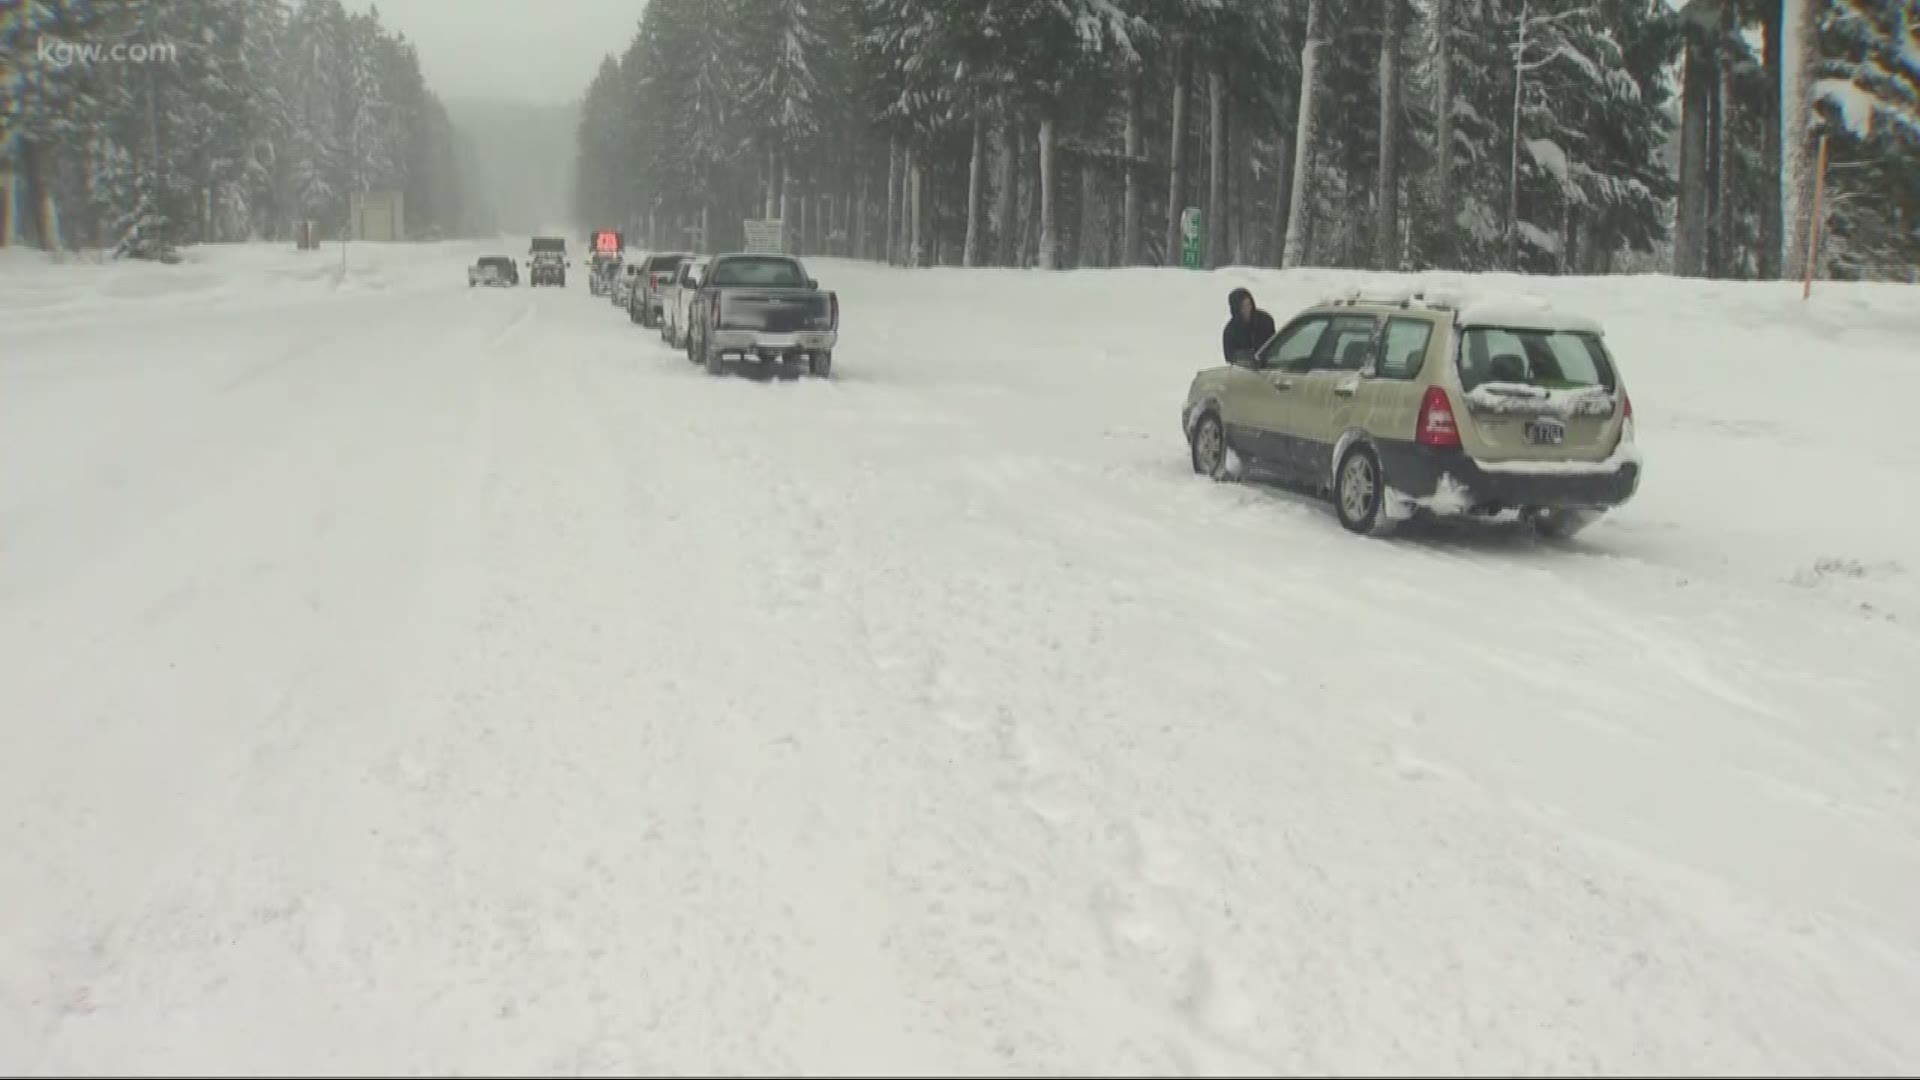 An avalanche closed Highway 20 near the Santiam Pass summit.